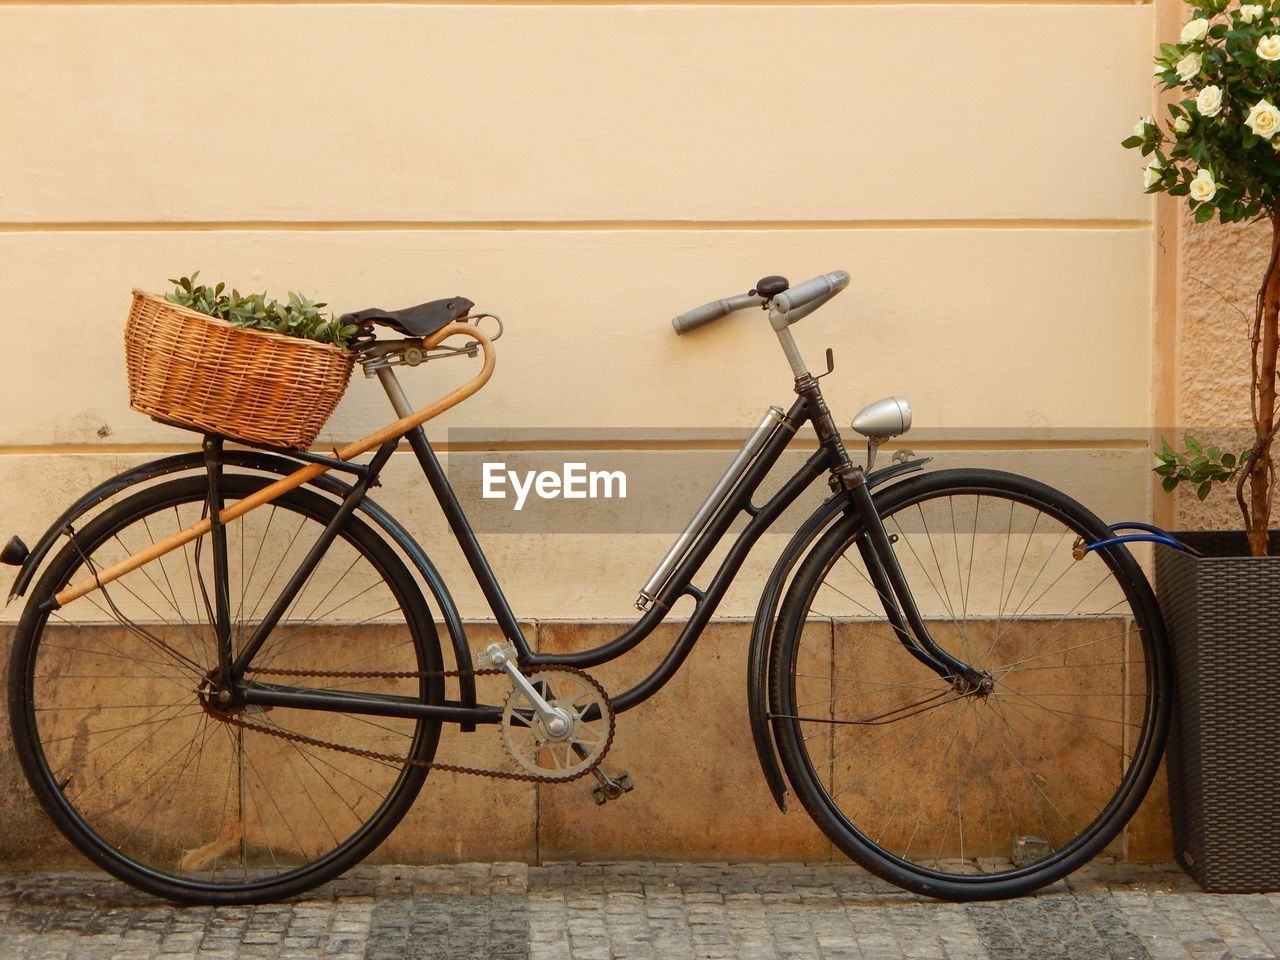 BICYCLES IN BASKET